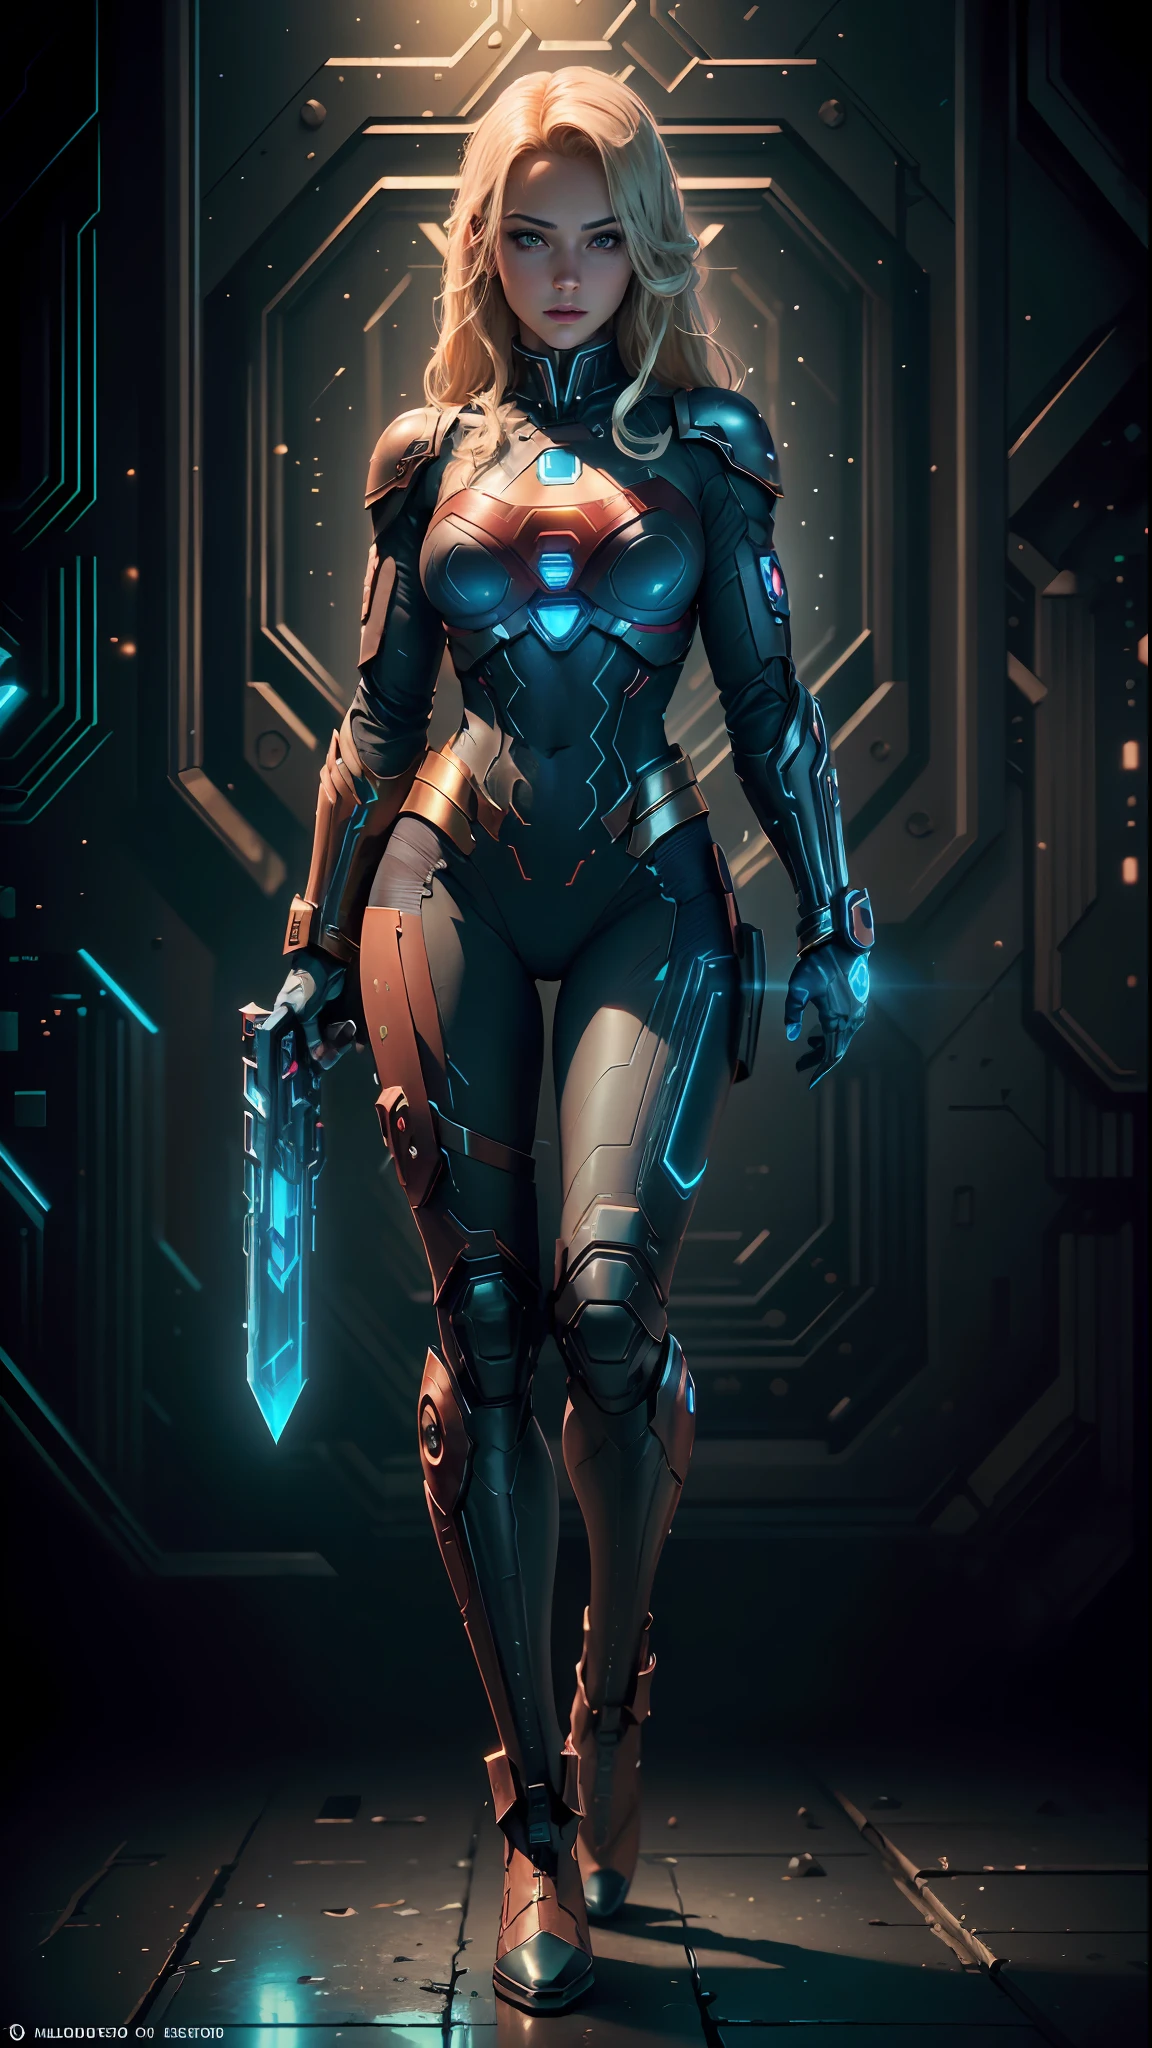 ((Best Quality)), ((Masterpiece)), (Detailed: 1.4), 3D, an image of a beautiful cyberpunk Supergirl,HDR (High Dynamic Range),Ray Tracing,NVIDIA RTX,Super-Resolution,Unreal 5,Subsurface Dispersion, PBR Texture, Post-processing, Anisotropic Filtering, Depth of Field, Maximum Clarity and Sharpness, Multilayer Textures, Albedo and Specular Maps, Surface Shading, Accurate Simulation of Light-Material Interaction, Perfect Proportions, Octane Render,  Two-Tone Lighting,Wide Aperture,Low ISO,White Balance,Rule of Thirds,8K RAW,CircuitBoardAI, Blonde Hair, Blue Eyes, Superman S Symbol on Chest, Red Color Boots.